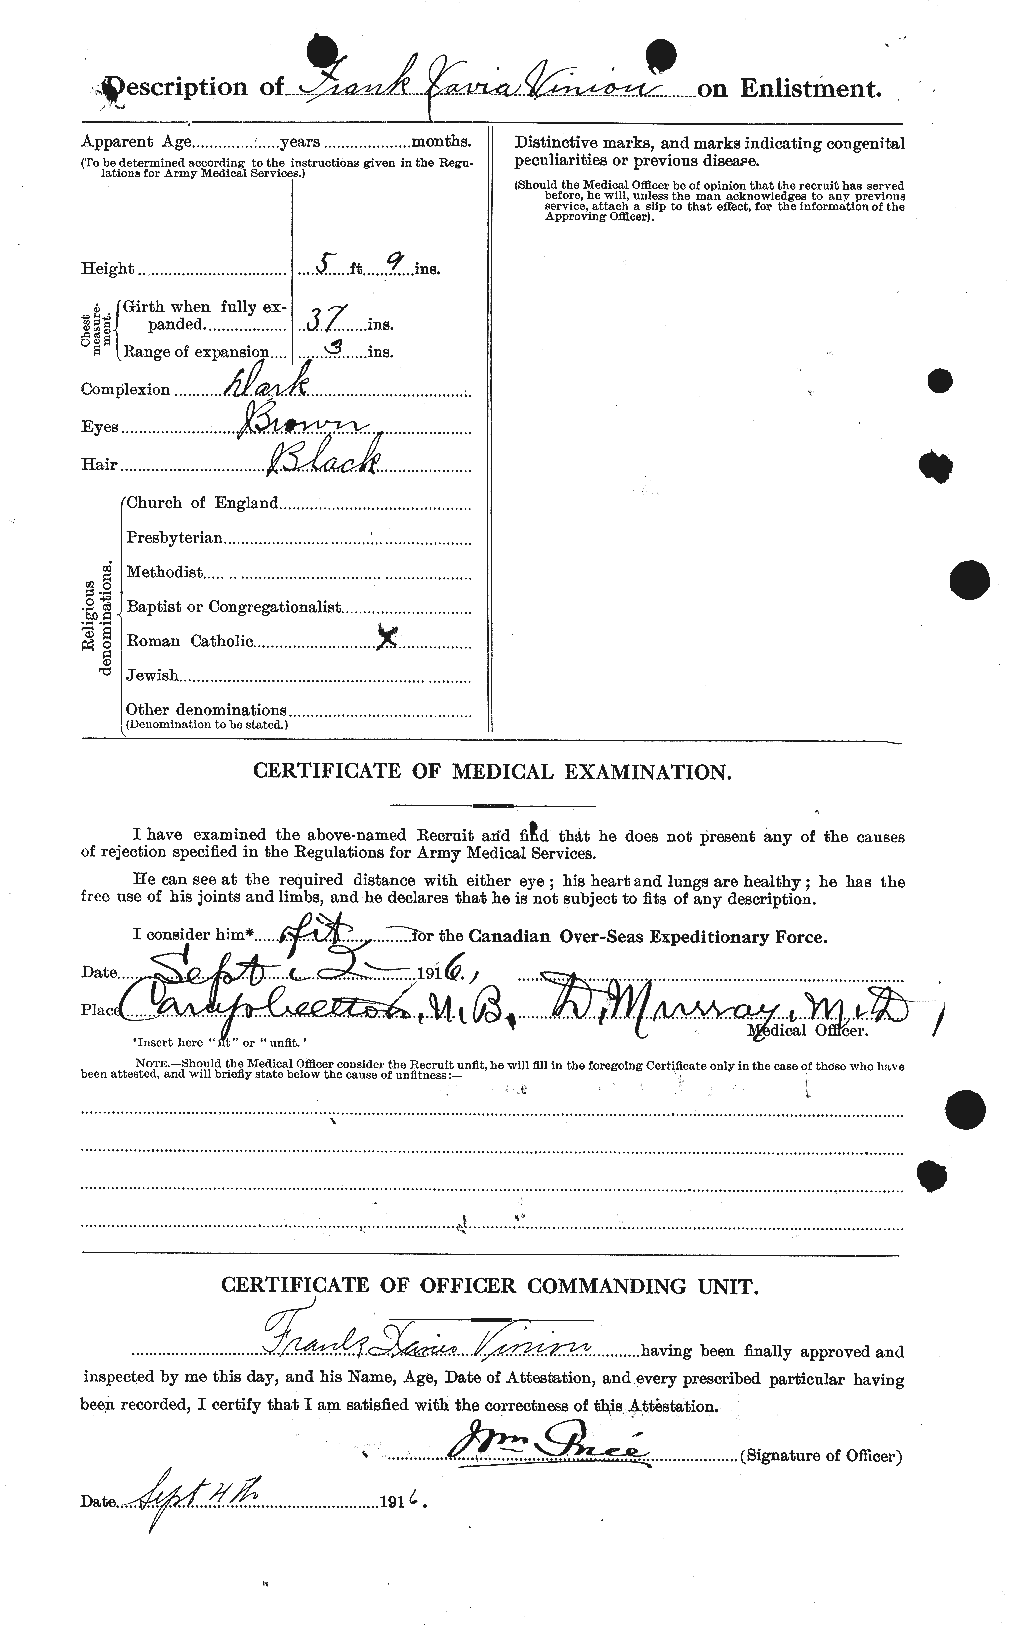 Personnel Records of the First World War - CEF 652367b